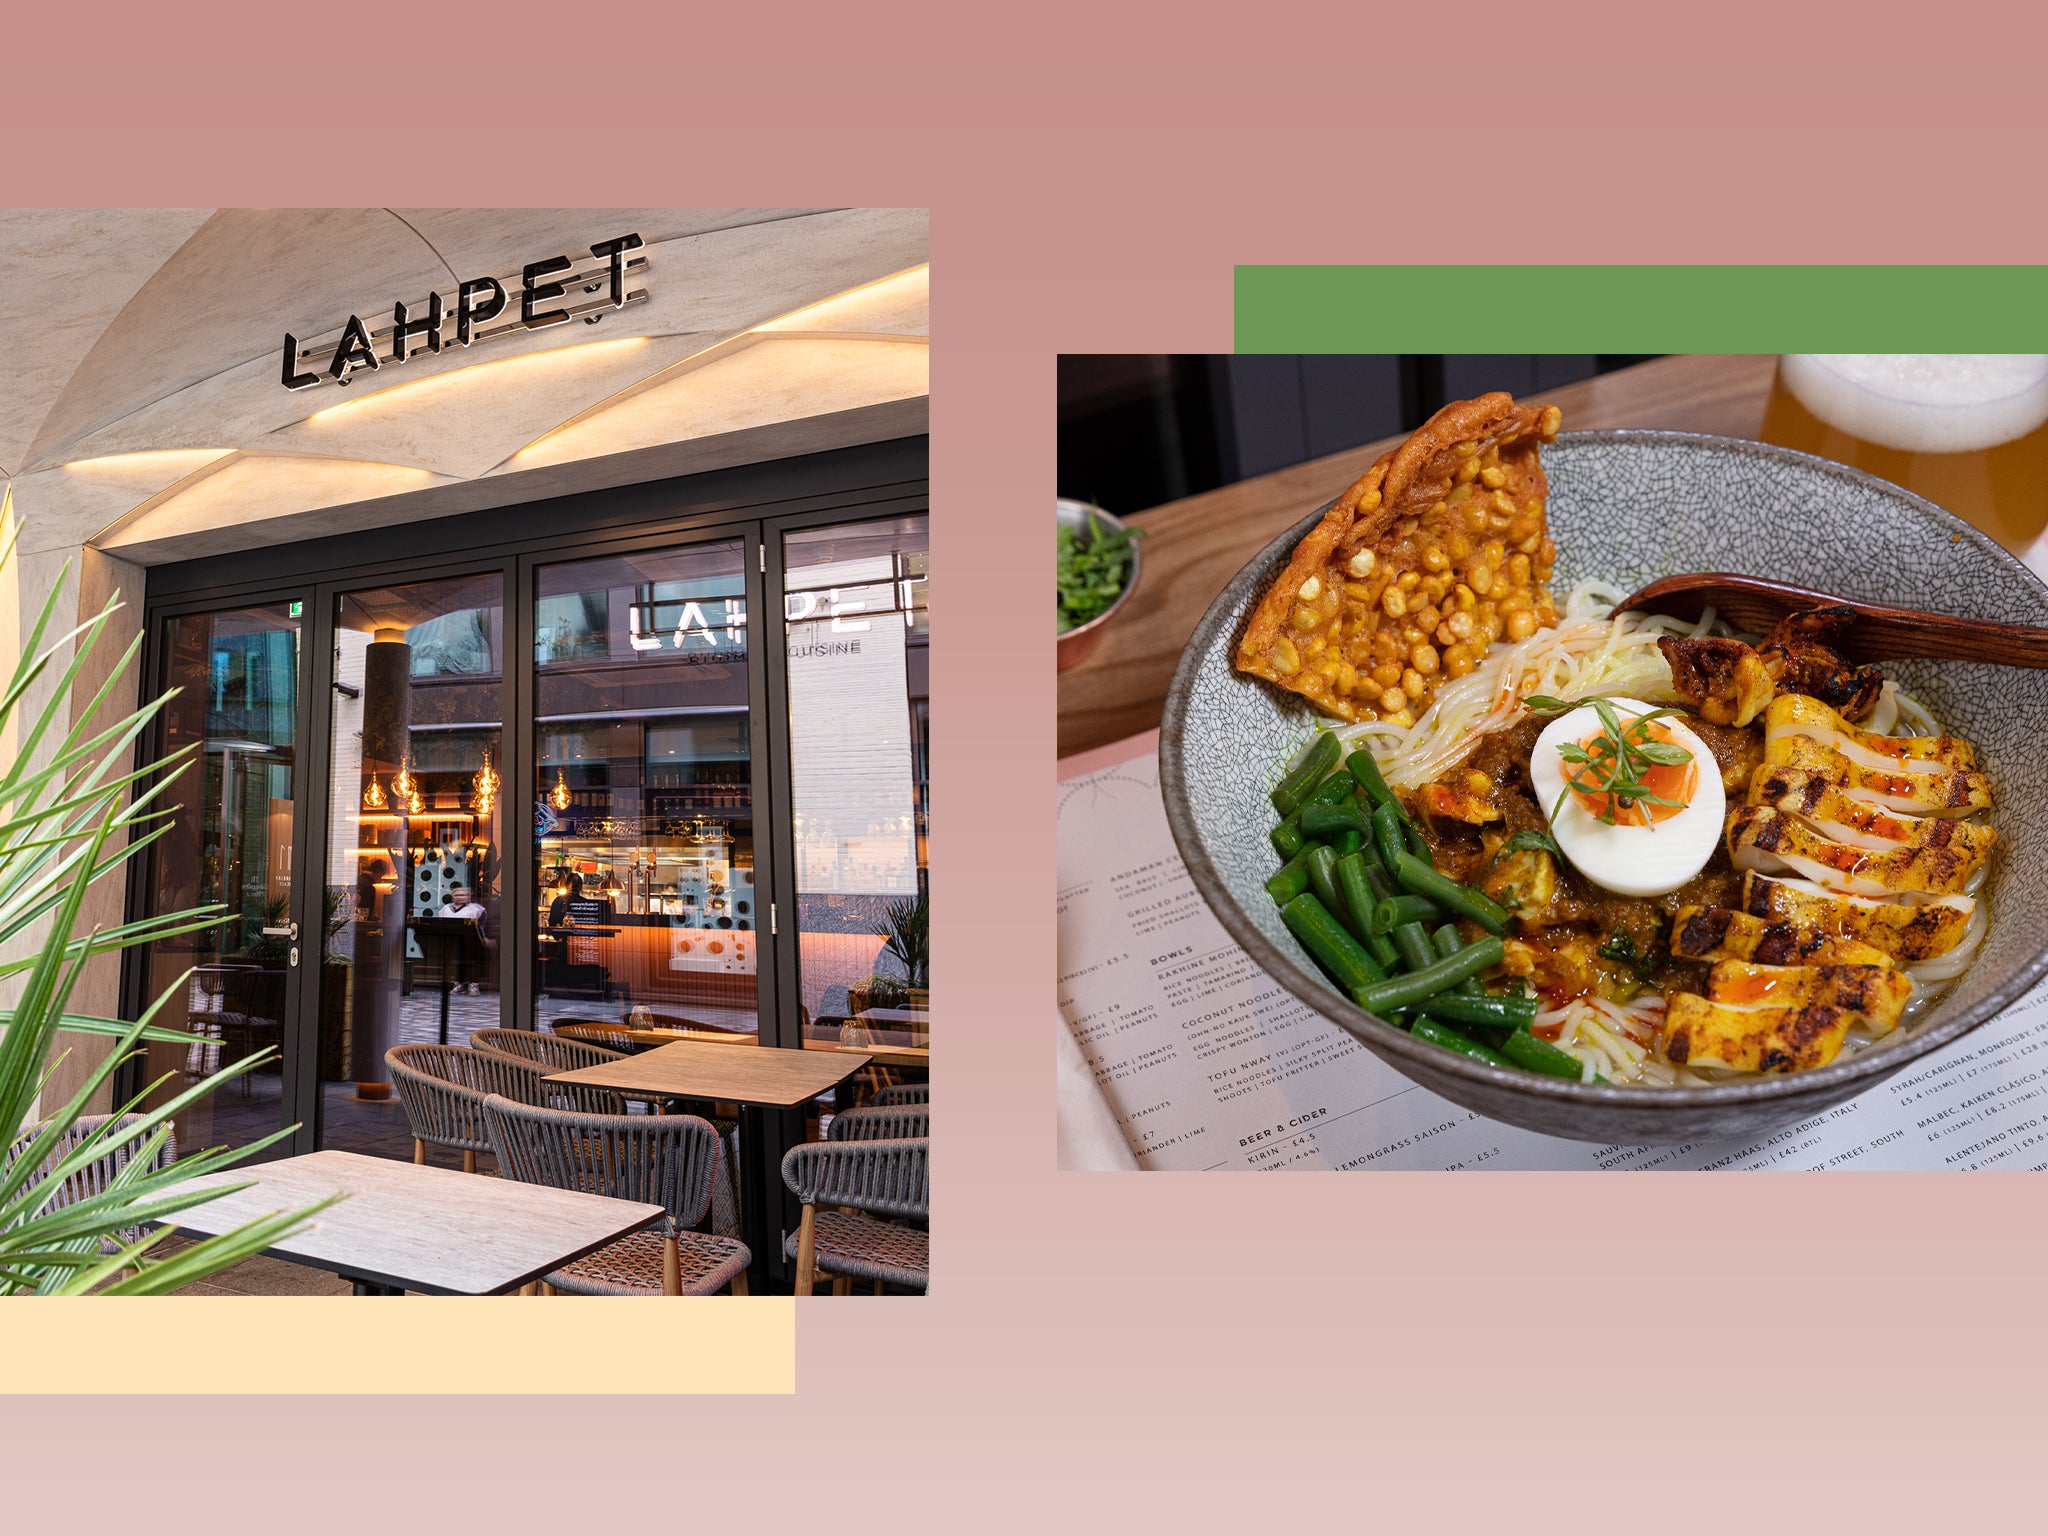 Lahpet’s new location brings Burmese food into the heart of the capital